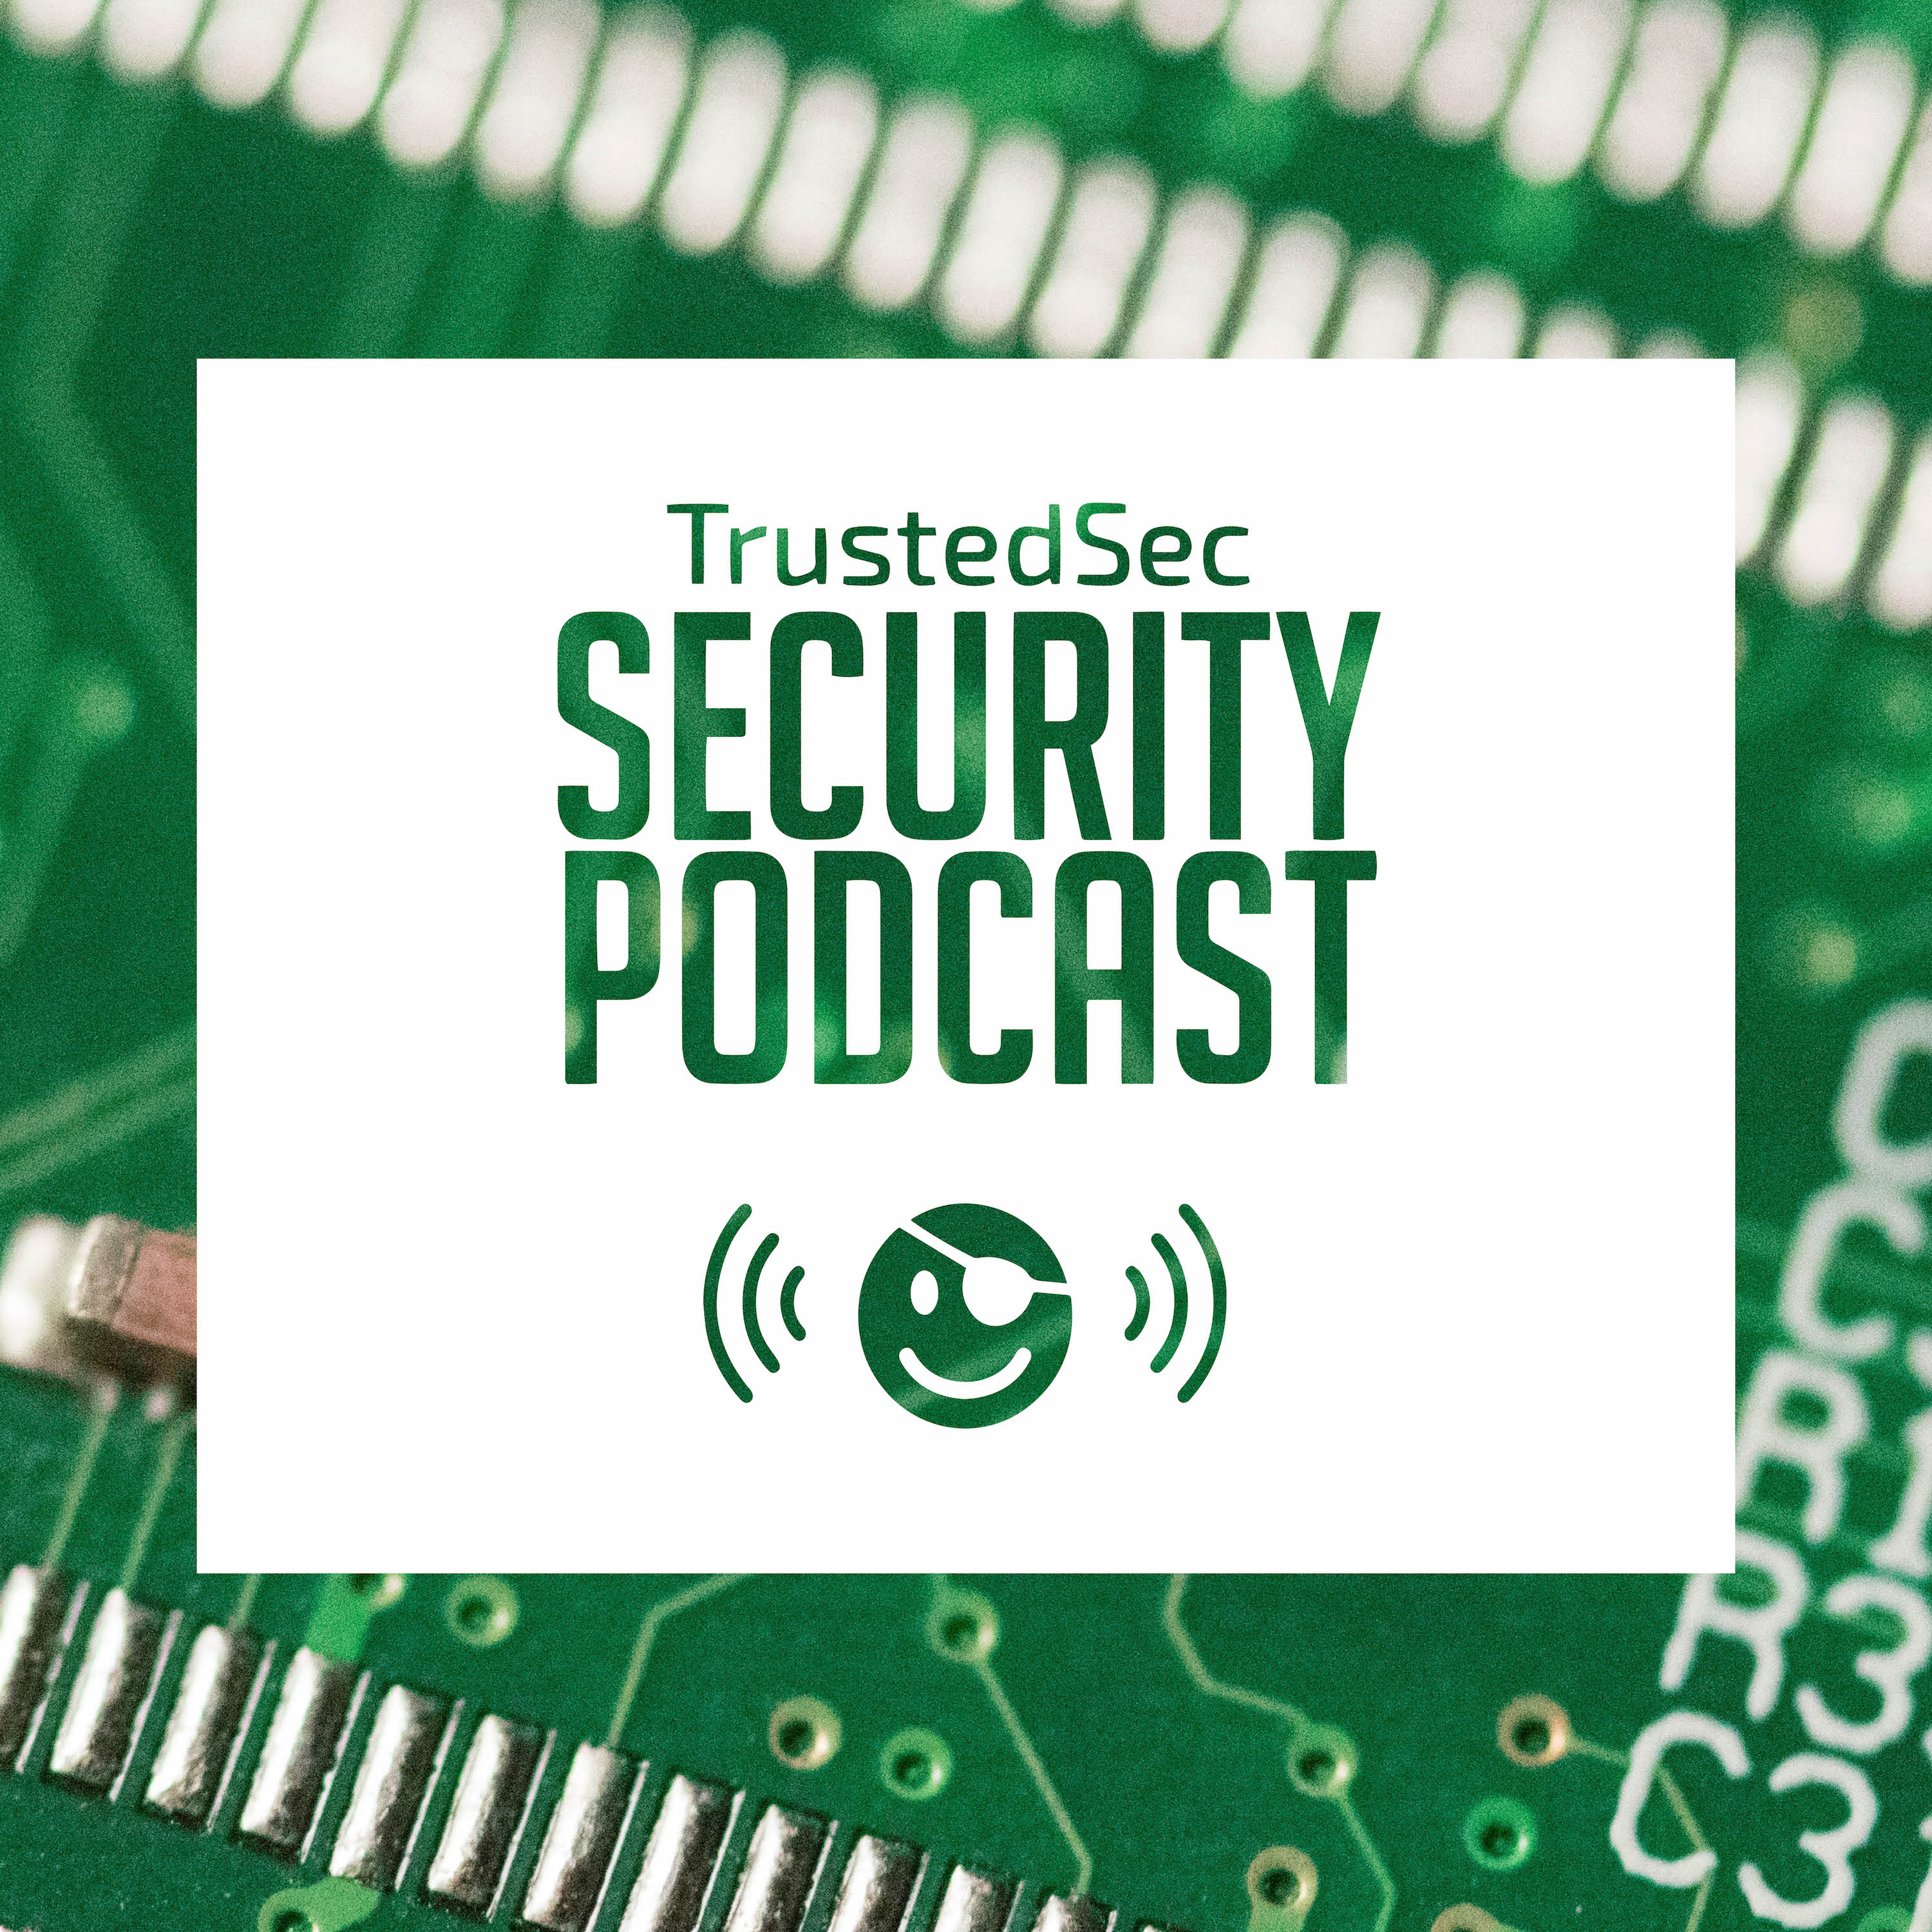 TrustedSec Security Podcasts